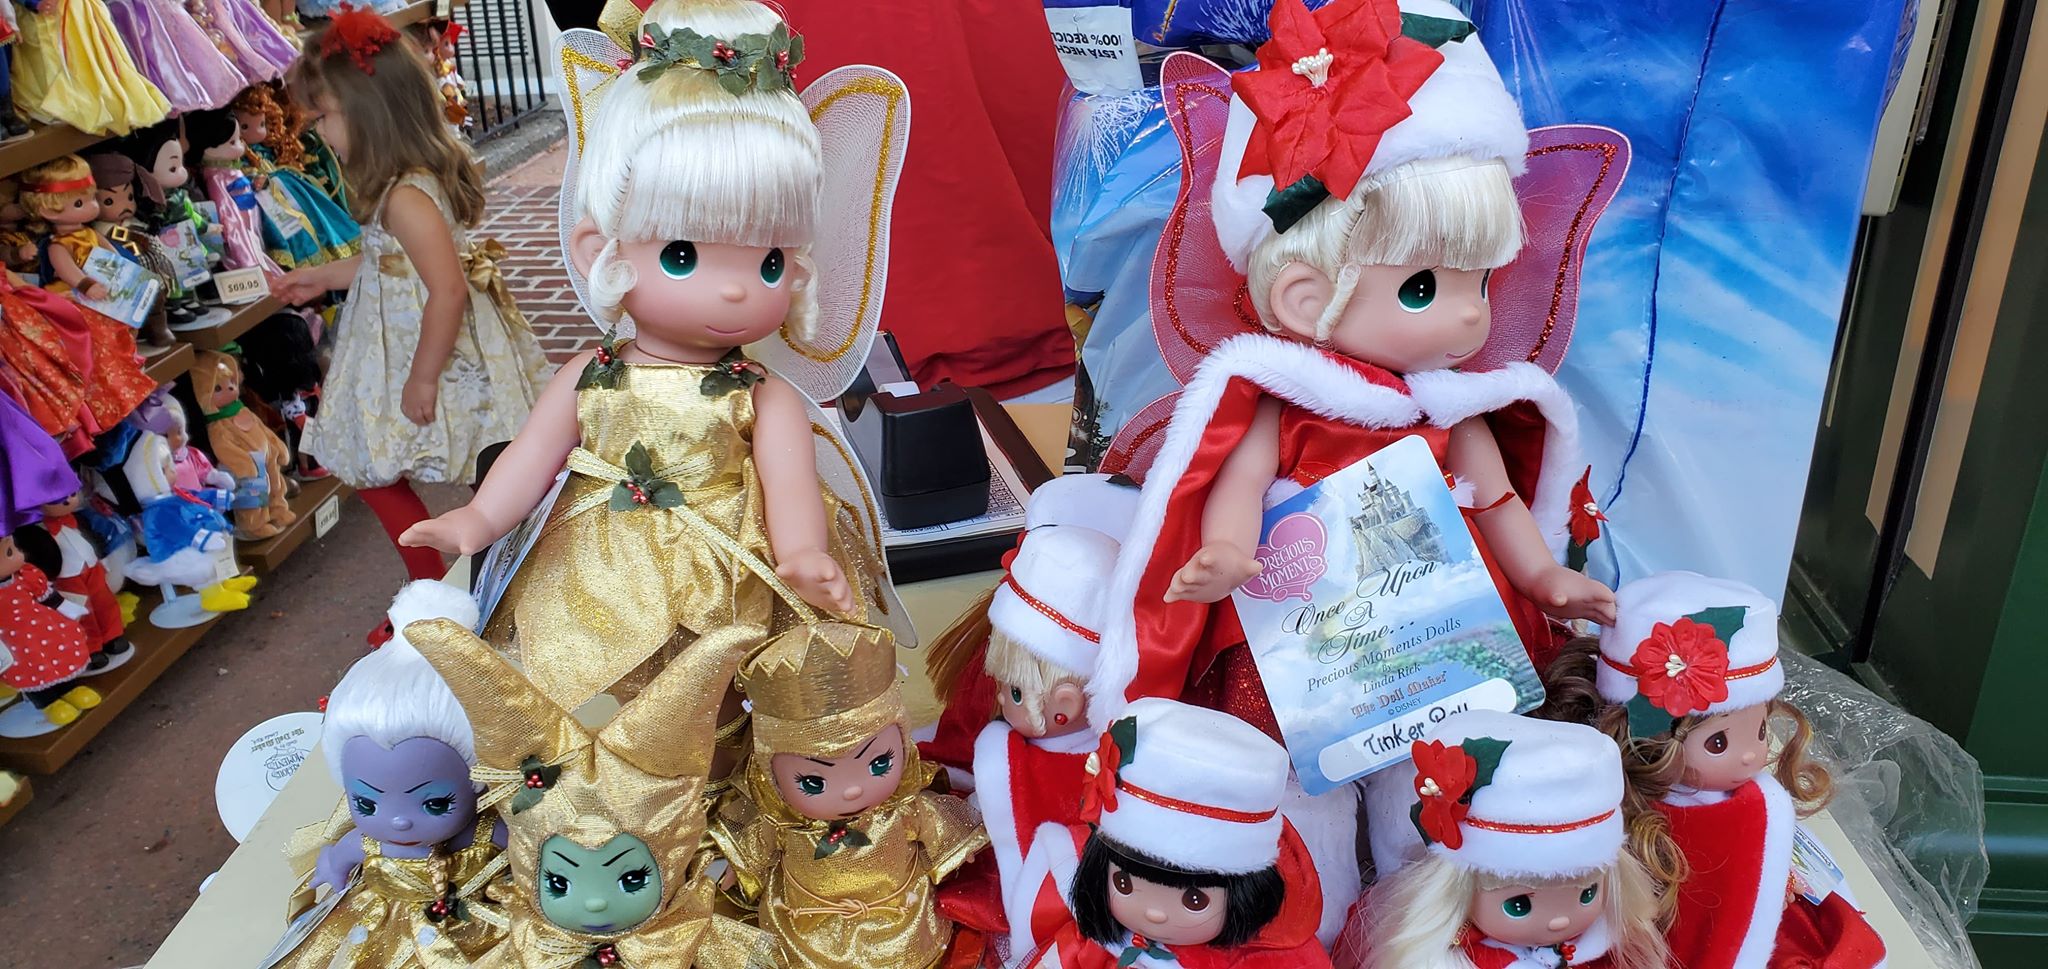 Disney Precious Moments Dolls Are Dazzling For The Holidays